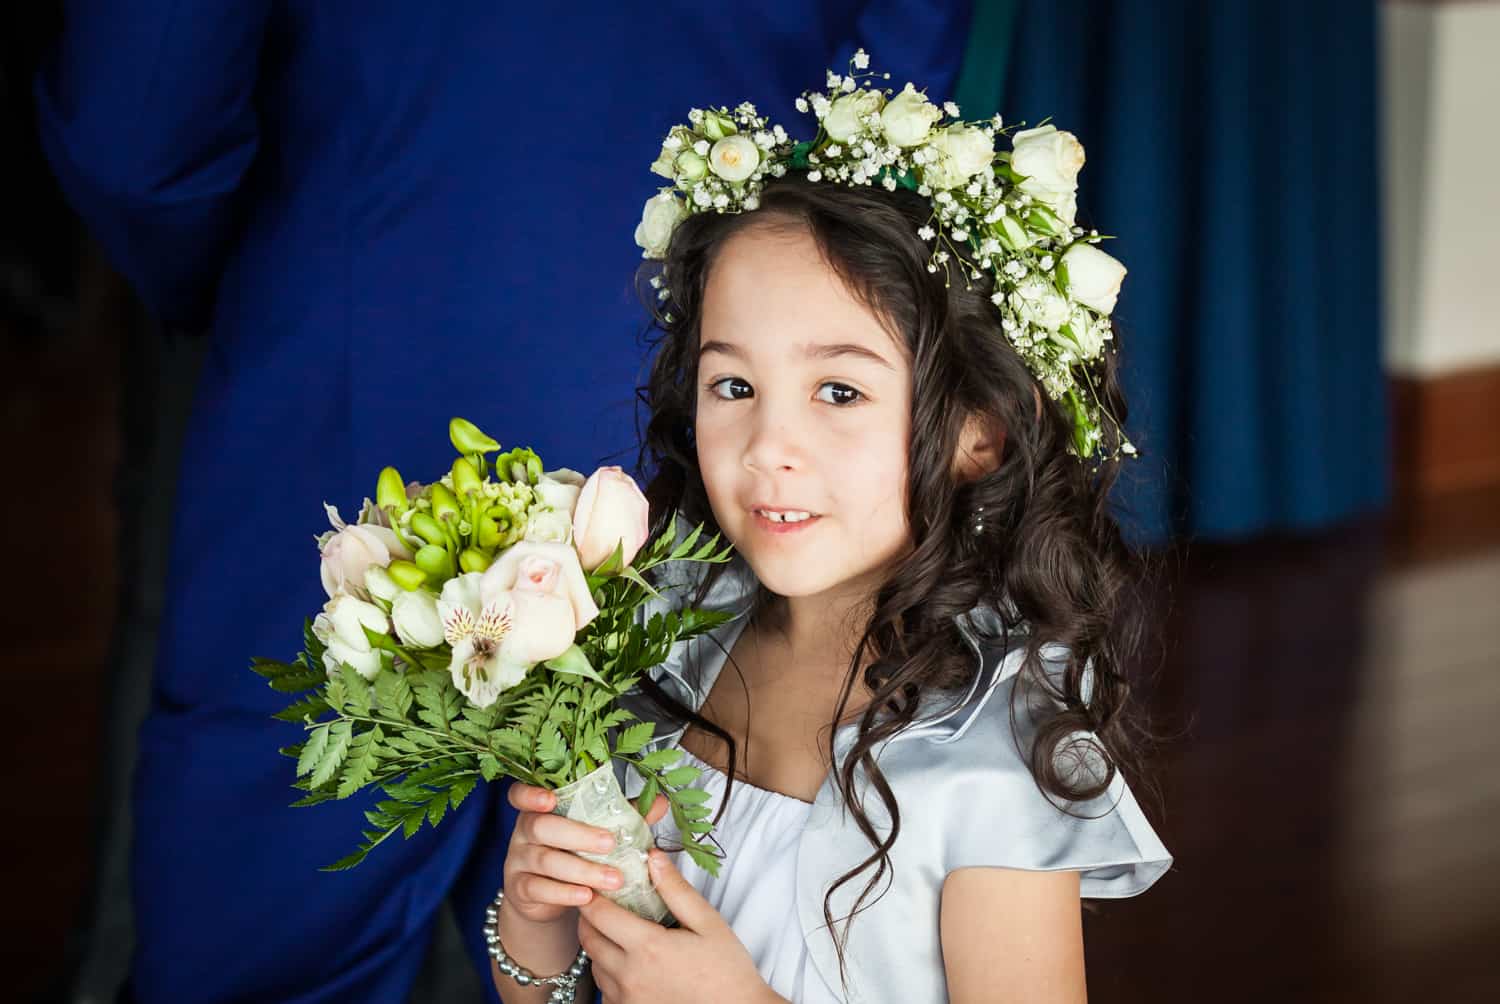 Little flower girl holding bouquet and wearing flower crown